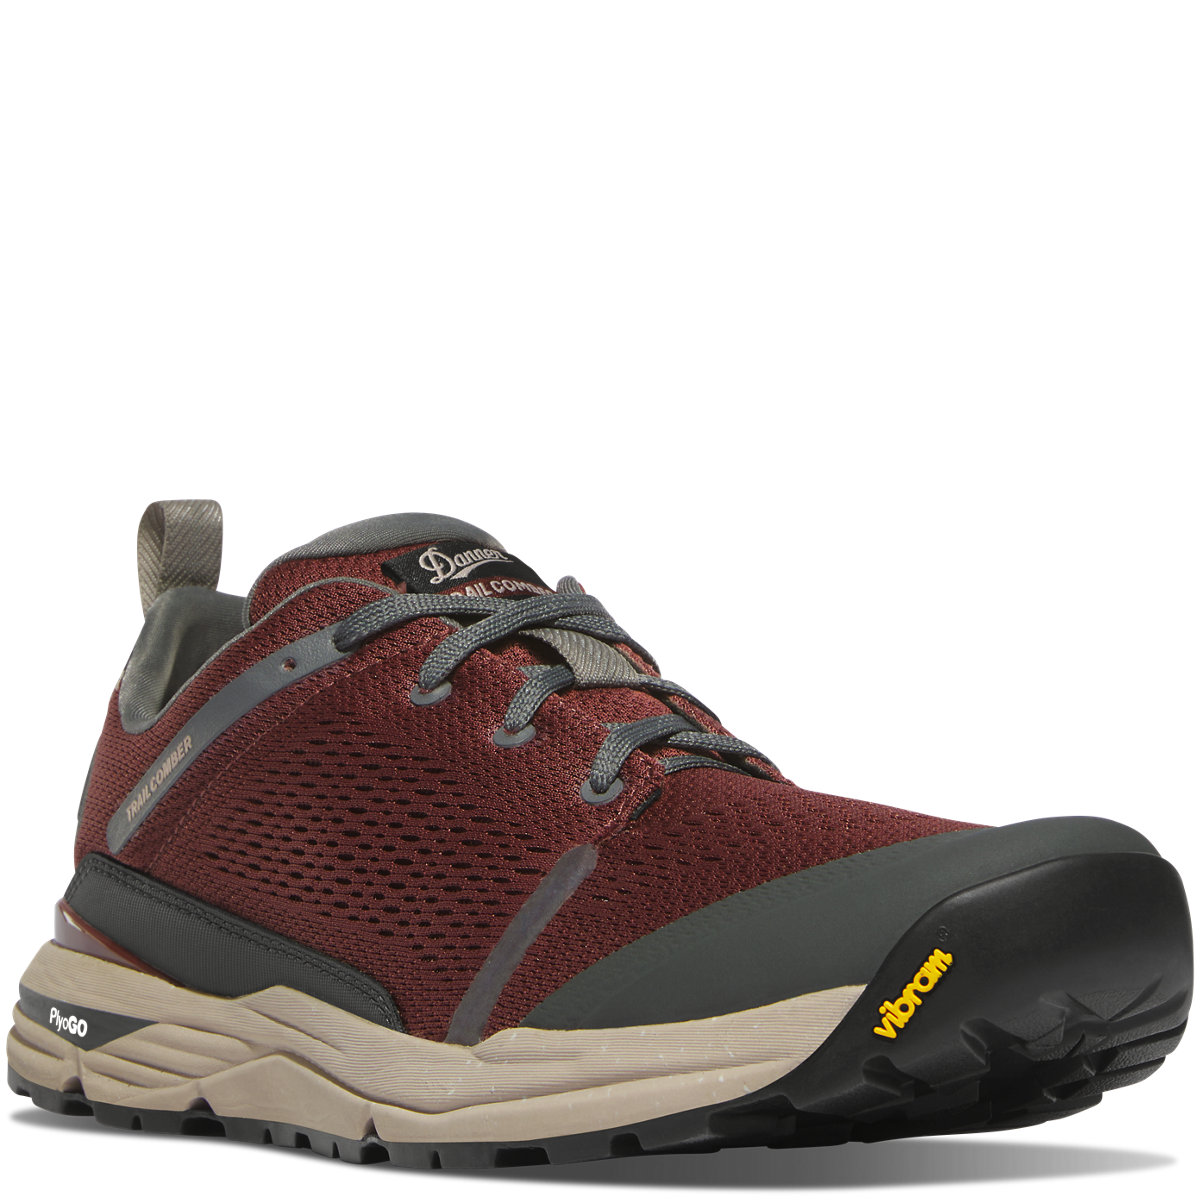 Trailcomber 3" Sable/Steel Gray